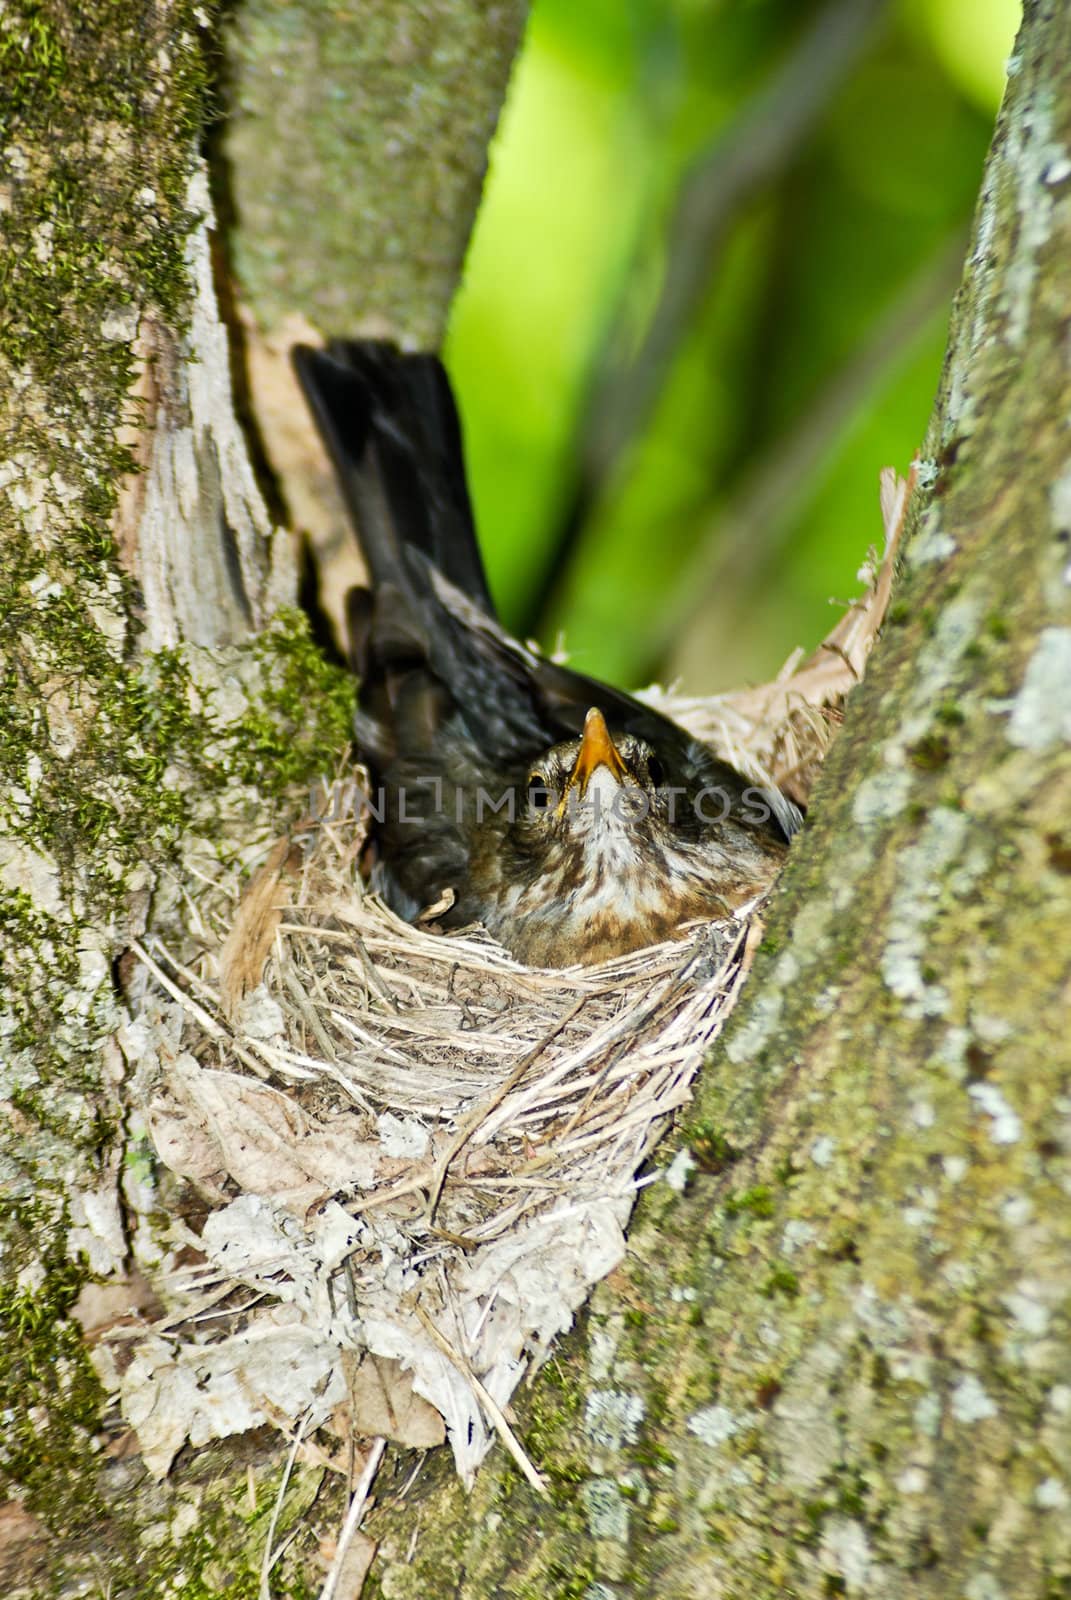 Female starling sitting in it's nest.